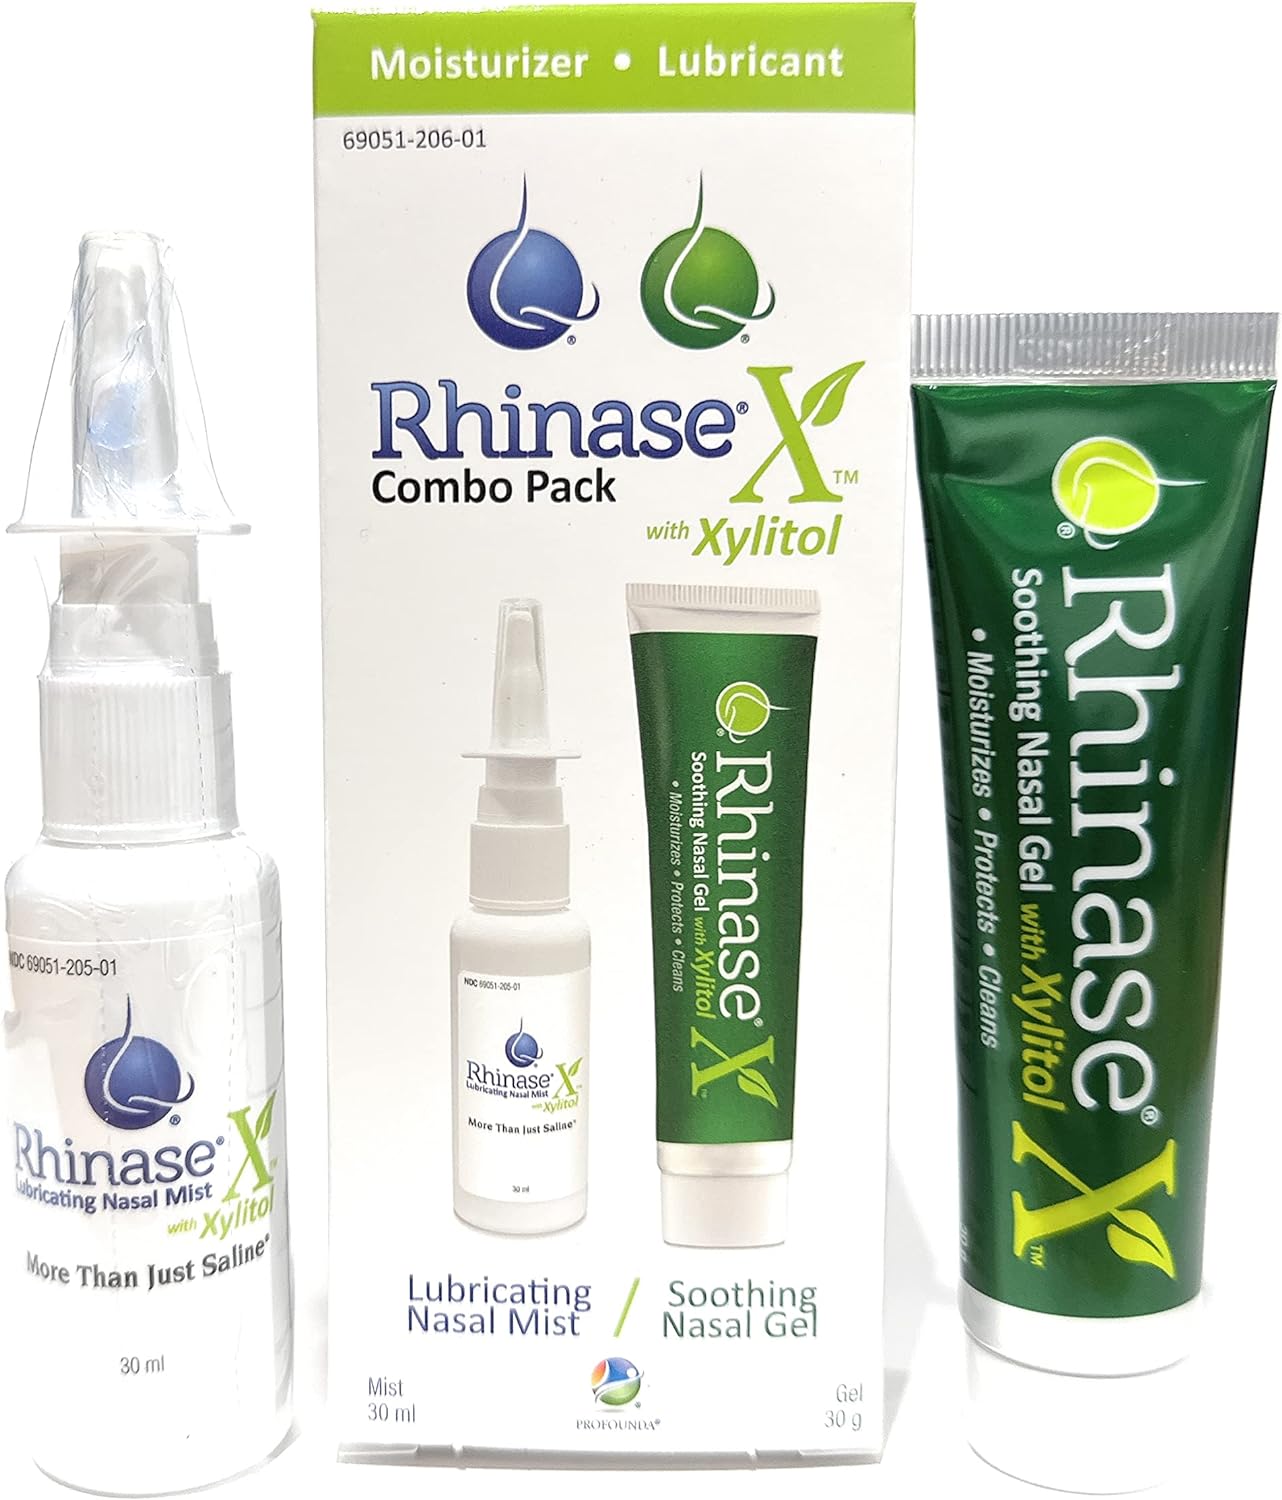 New:Rhinase X Combo Pack - Nasal Gel (30g) & Spray (30ml) for Complete Nasal Relief: Dryness, Congestion, Post Nasal Drip, and Allergies. Retain Moisture, Protect Against Moisture Loss and xylitol